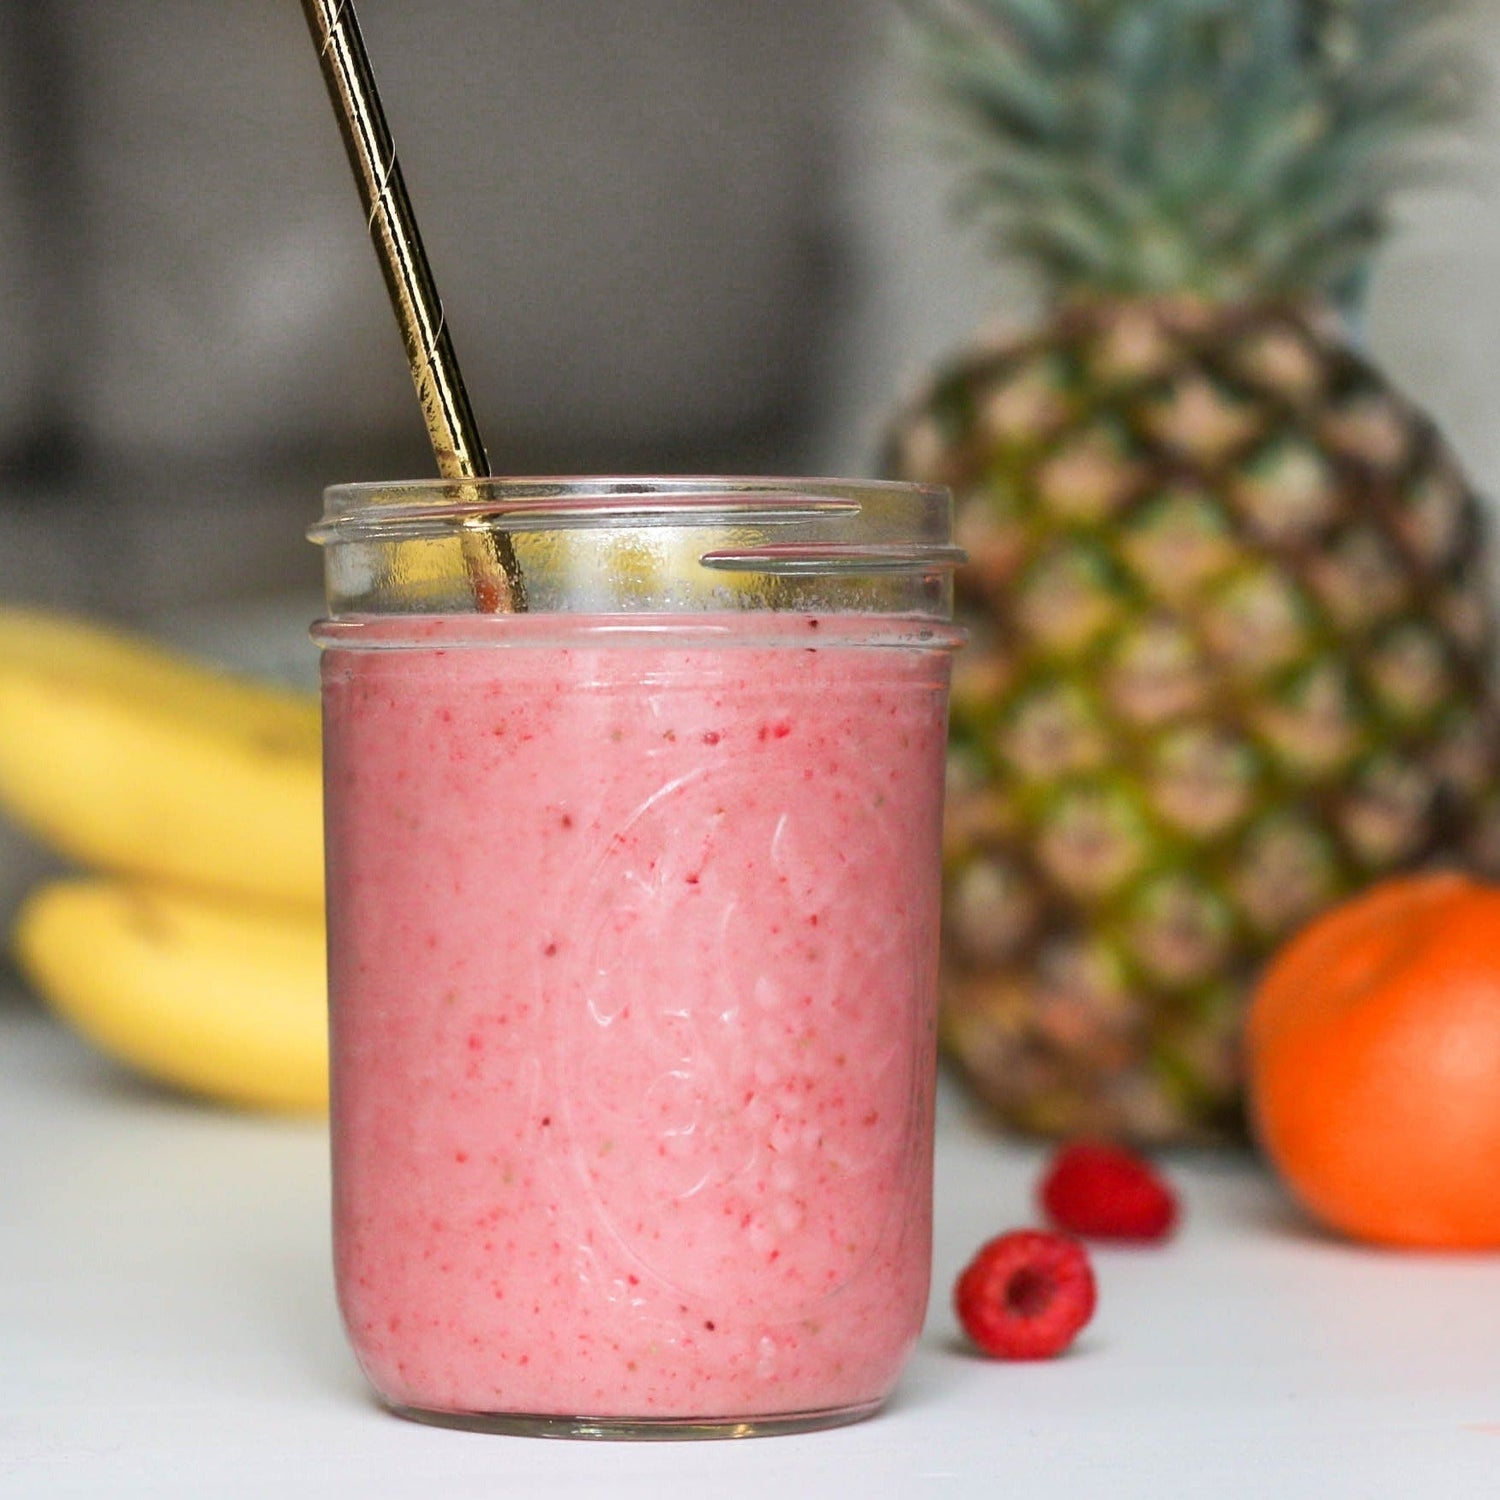 Frozen Smoothie Mix - Strawberry, Banana, Date &amp; Cardamom - Blend at Home